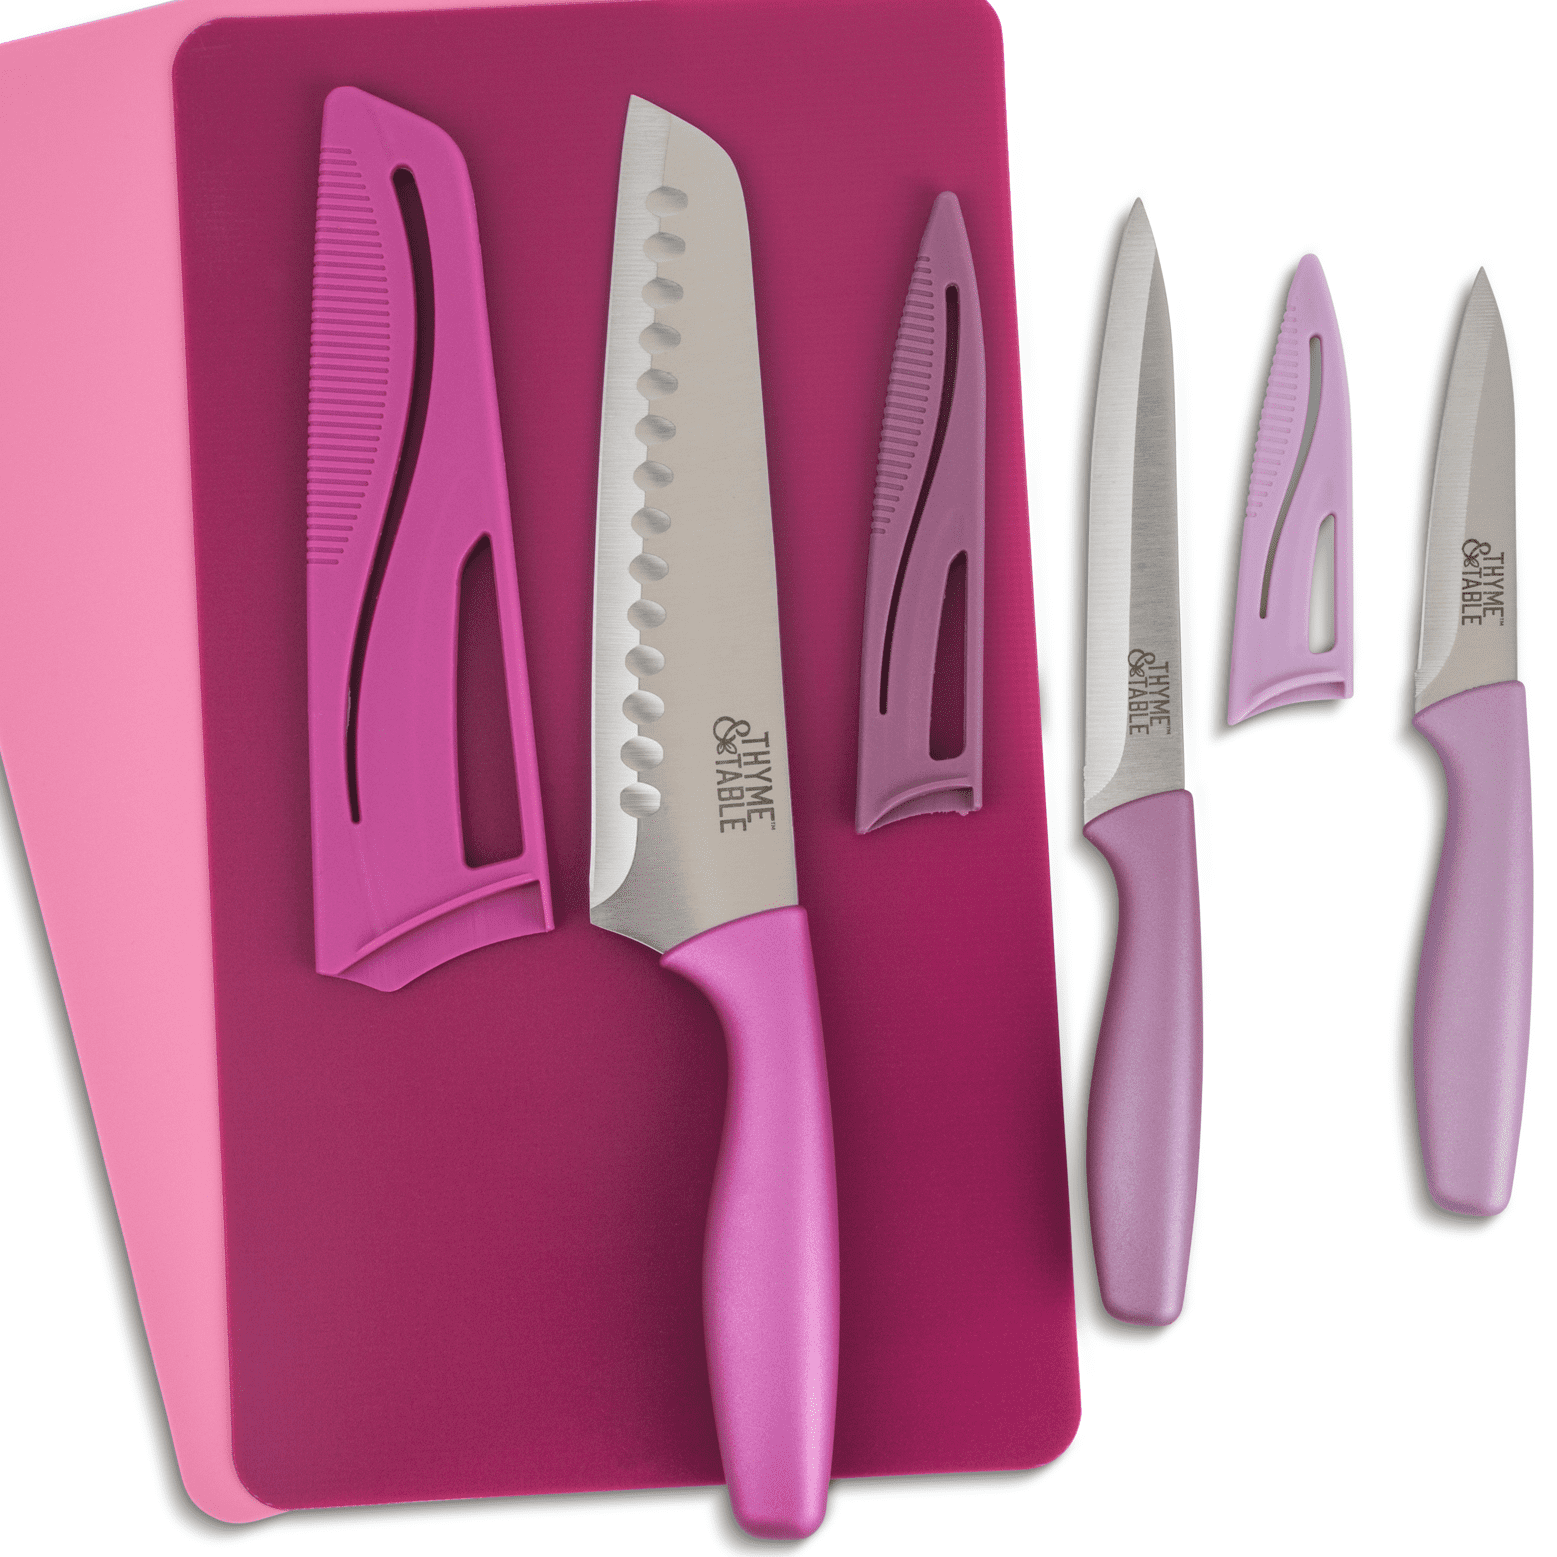 Thyme & Table Gold Chef Knife Set, 3 Piece – Walmart Inventory